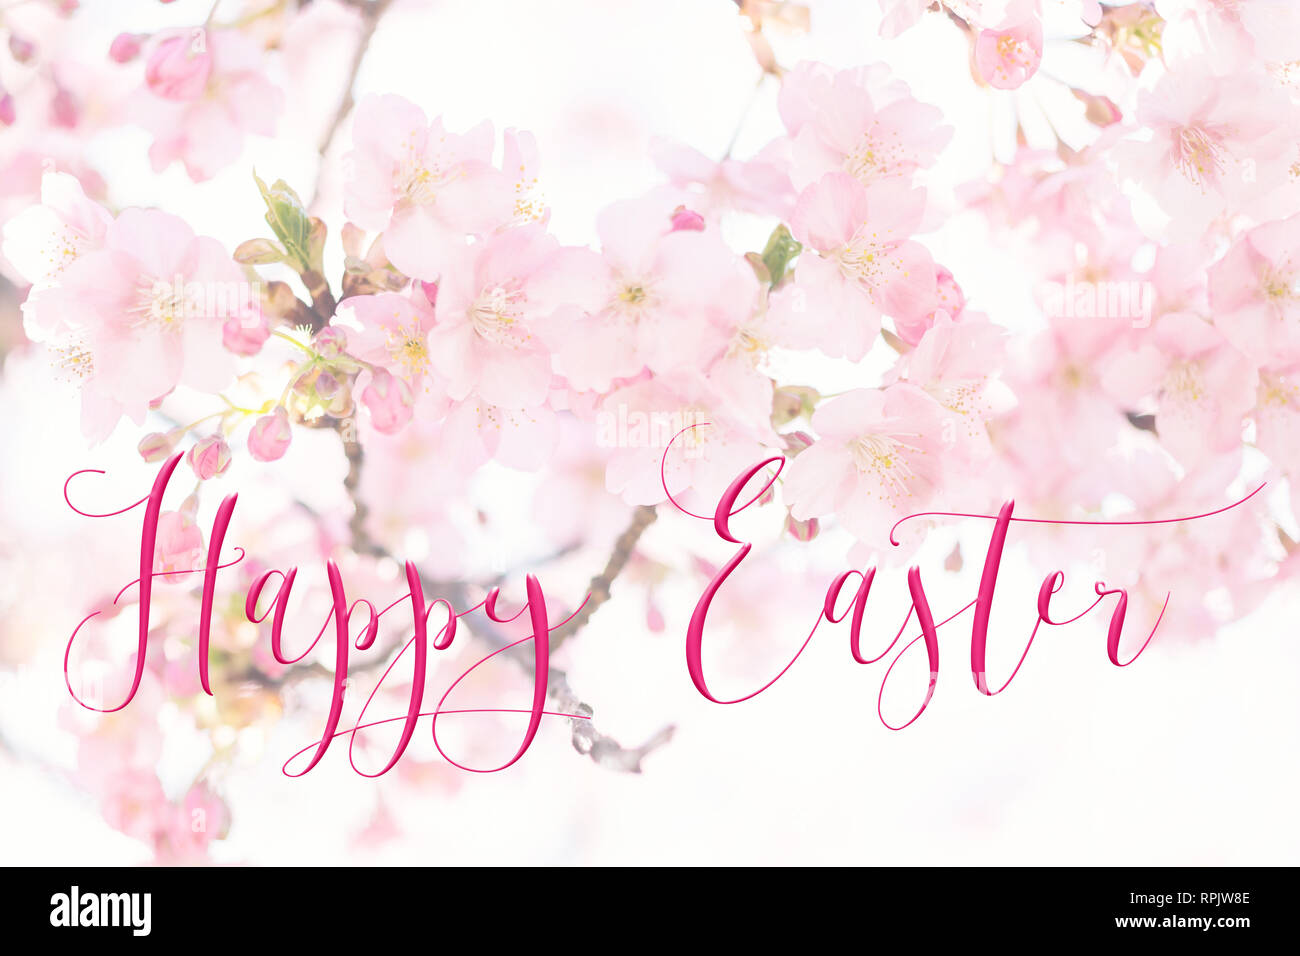 Horizontal Easter background with pretty pink blossom, and â€˜Happy Easterâ€™ quote. Perfect for Easter Social Media campaigns. Stock Photo